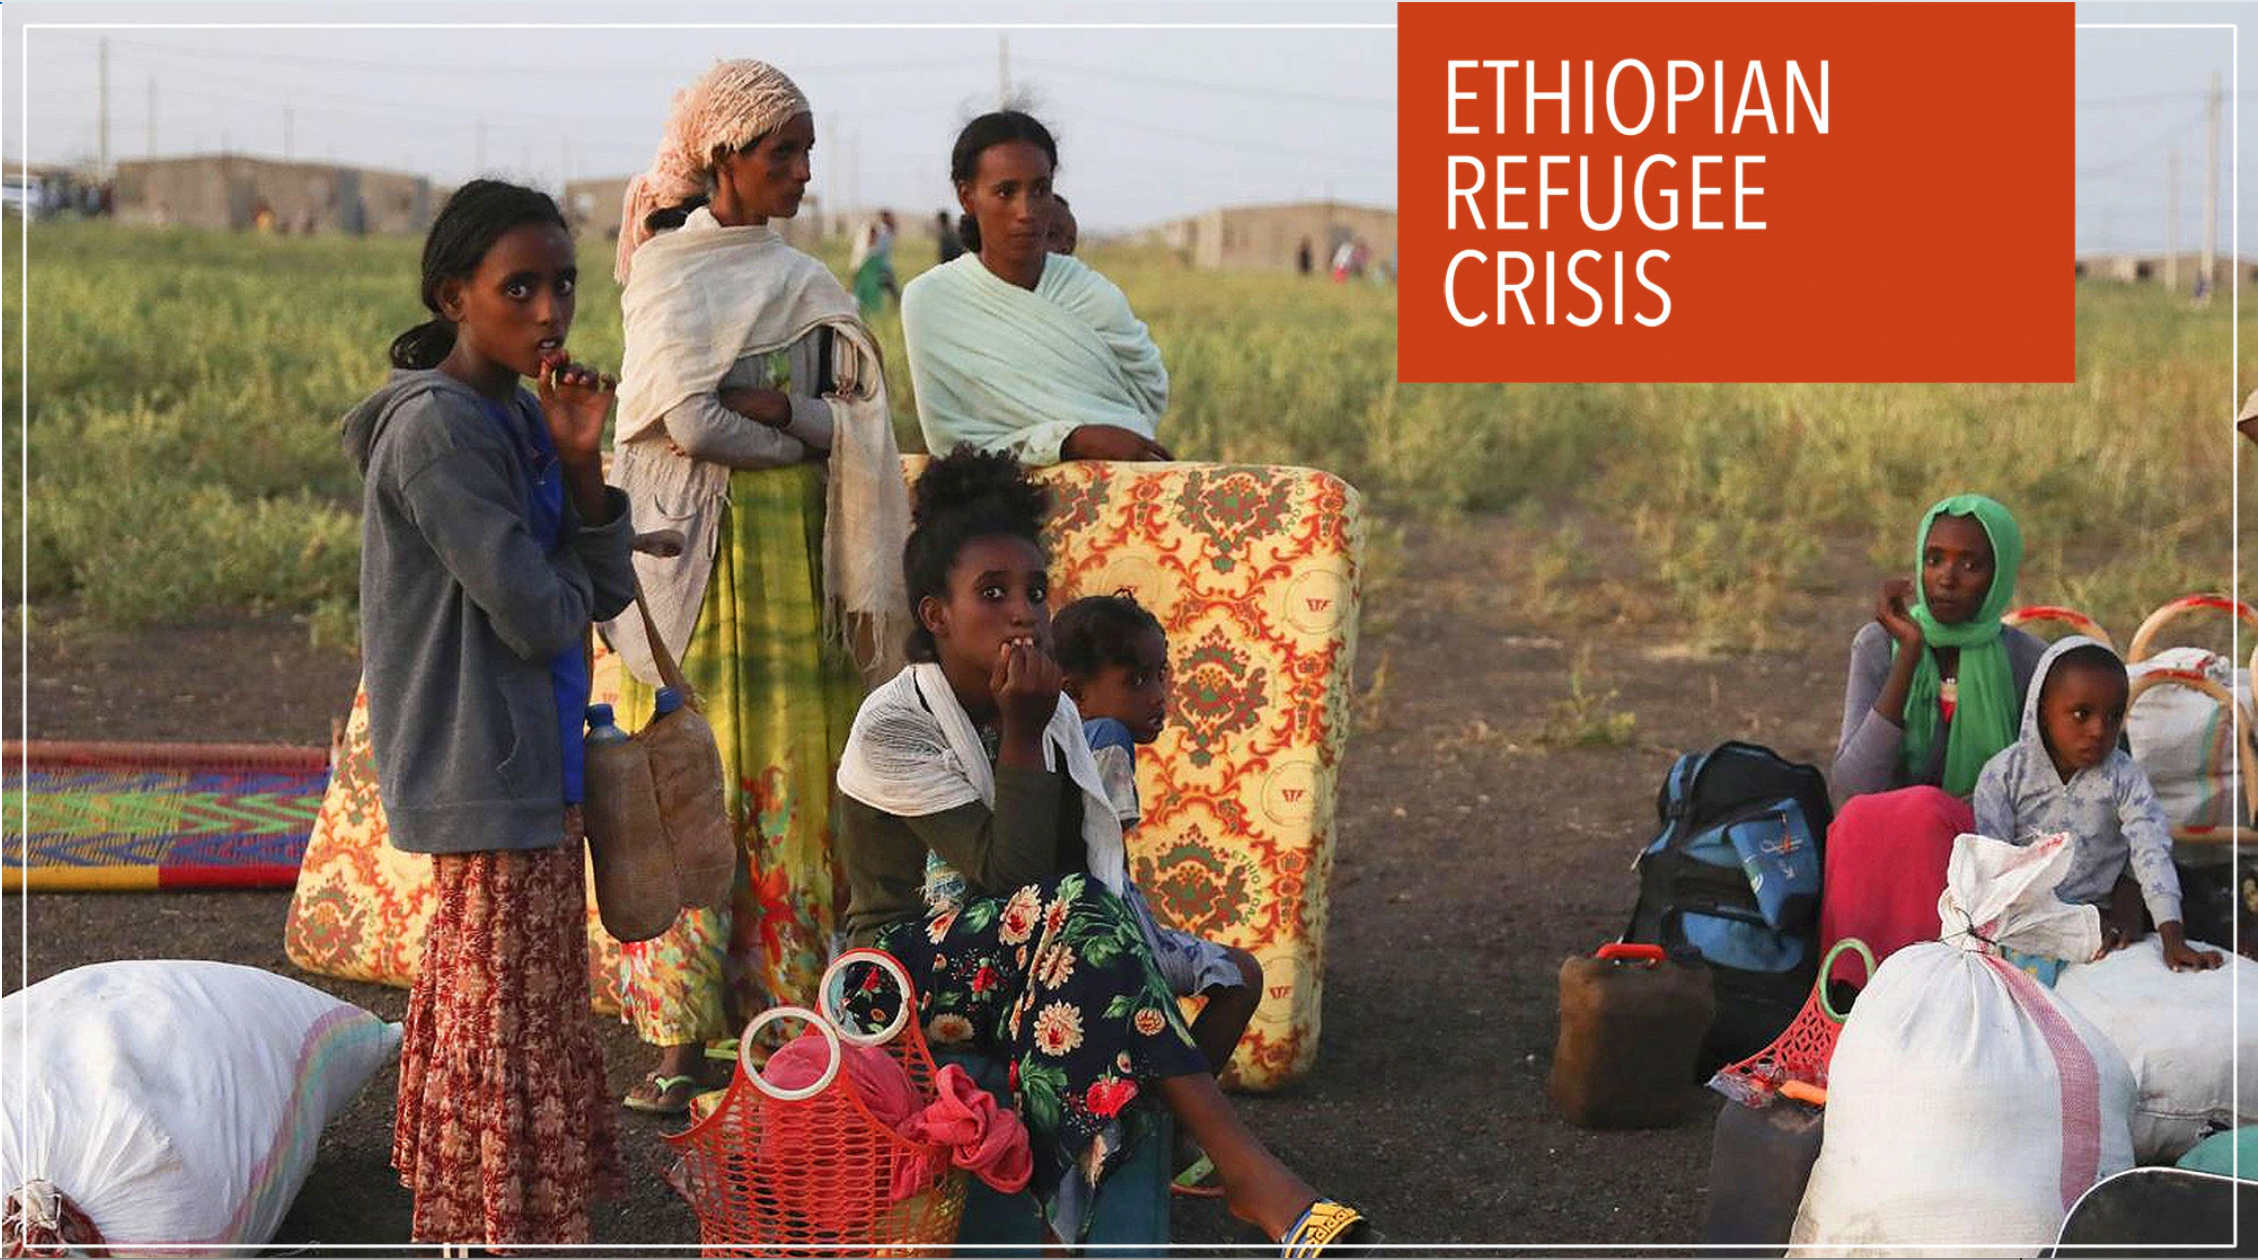 Ethiopia’s Tigray crisis covered in global VOA dispatches